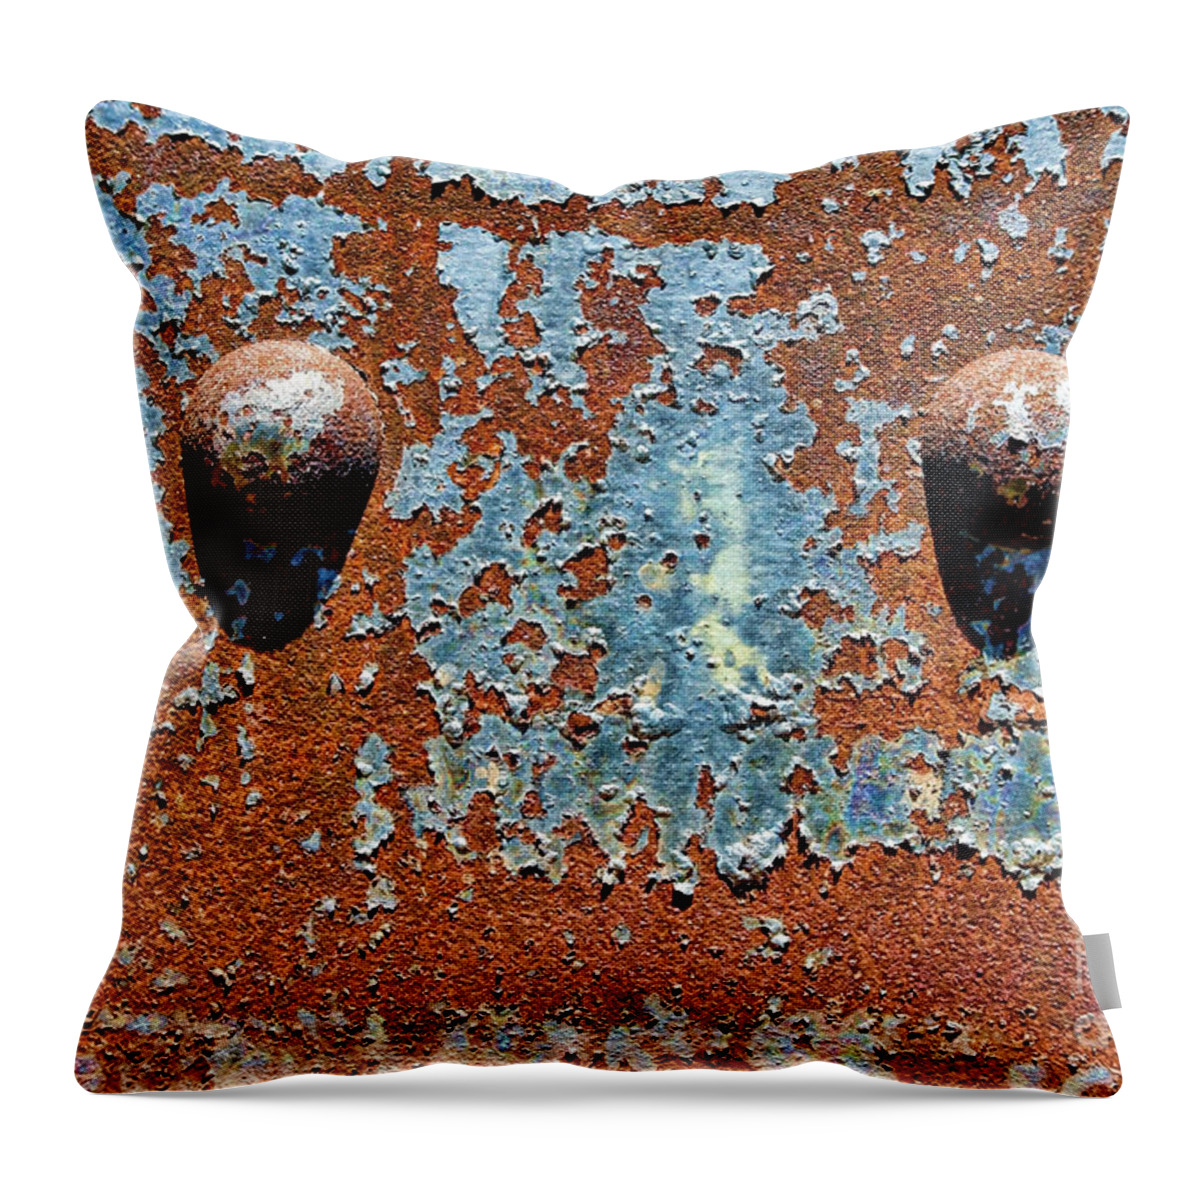 Rivet Throw Pillow featuring the photograph Rusty Rivets by Olivier Le Queinec